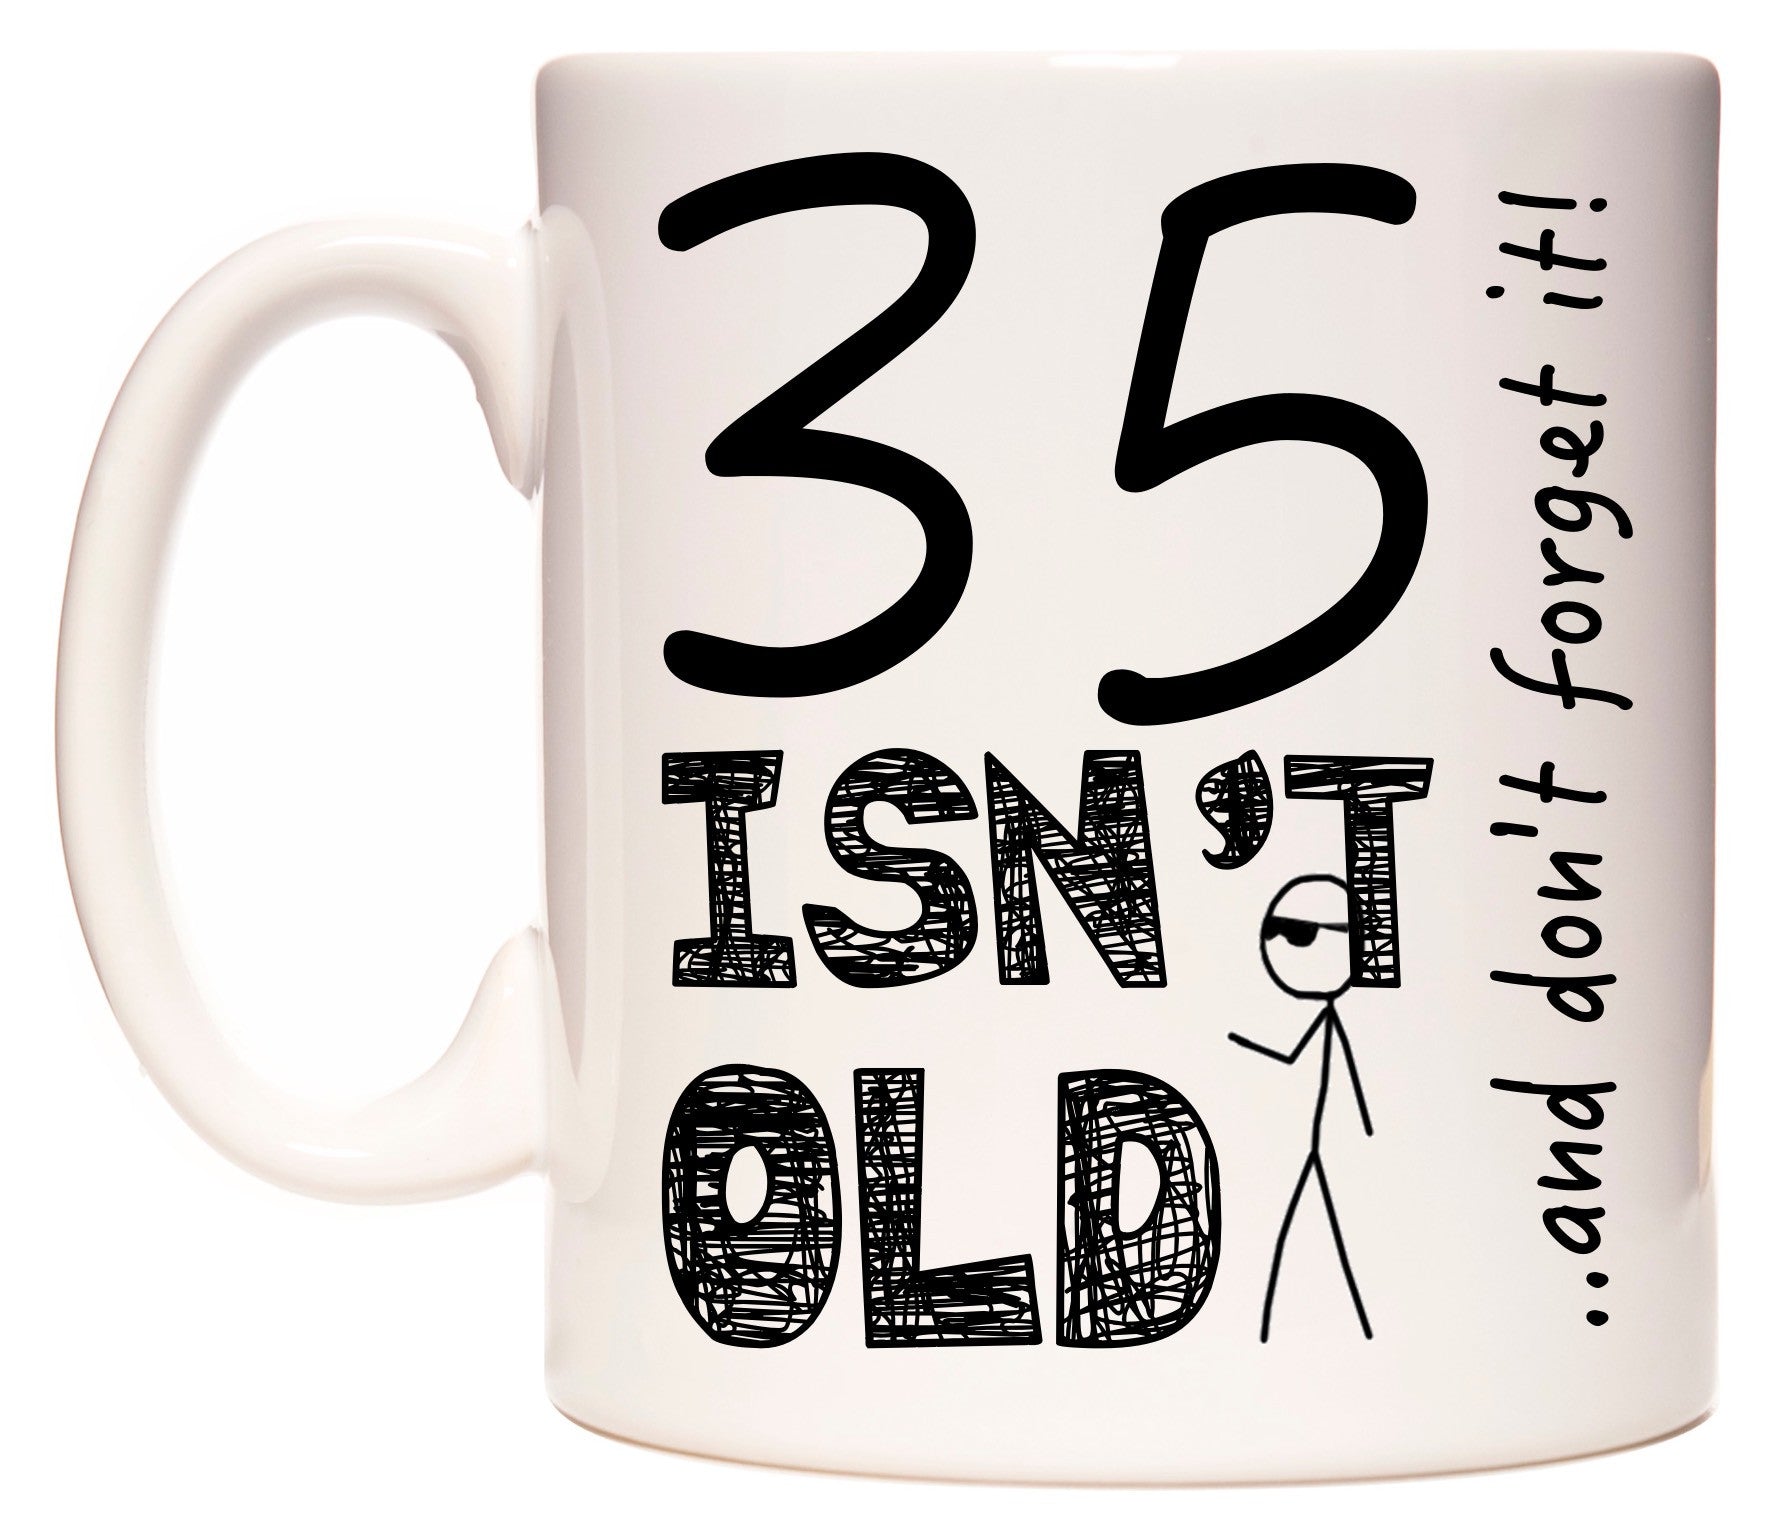 This mug features 35 Isn't Old